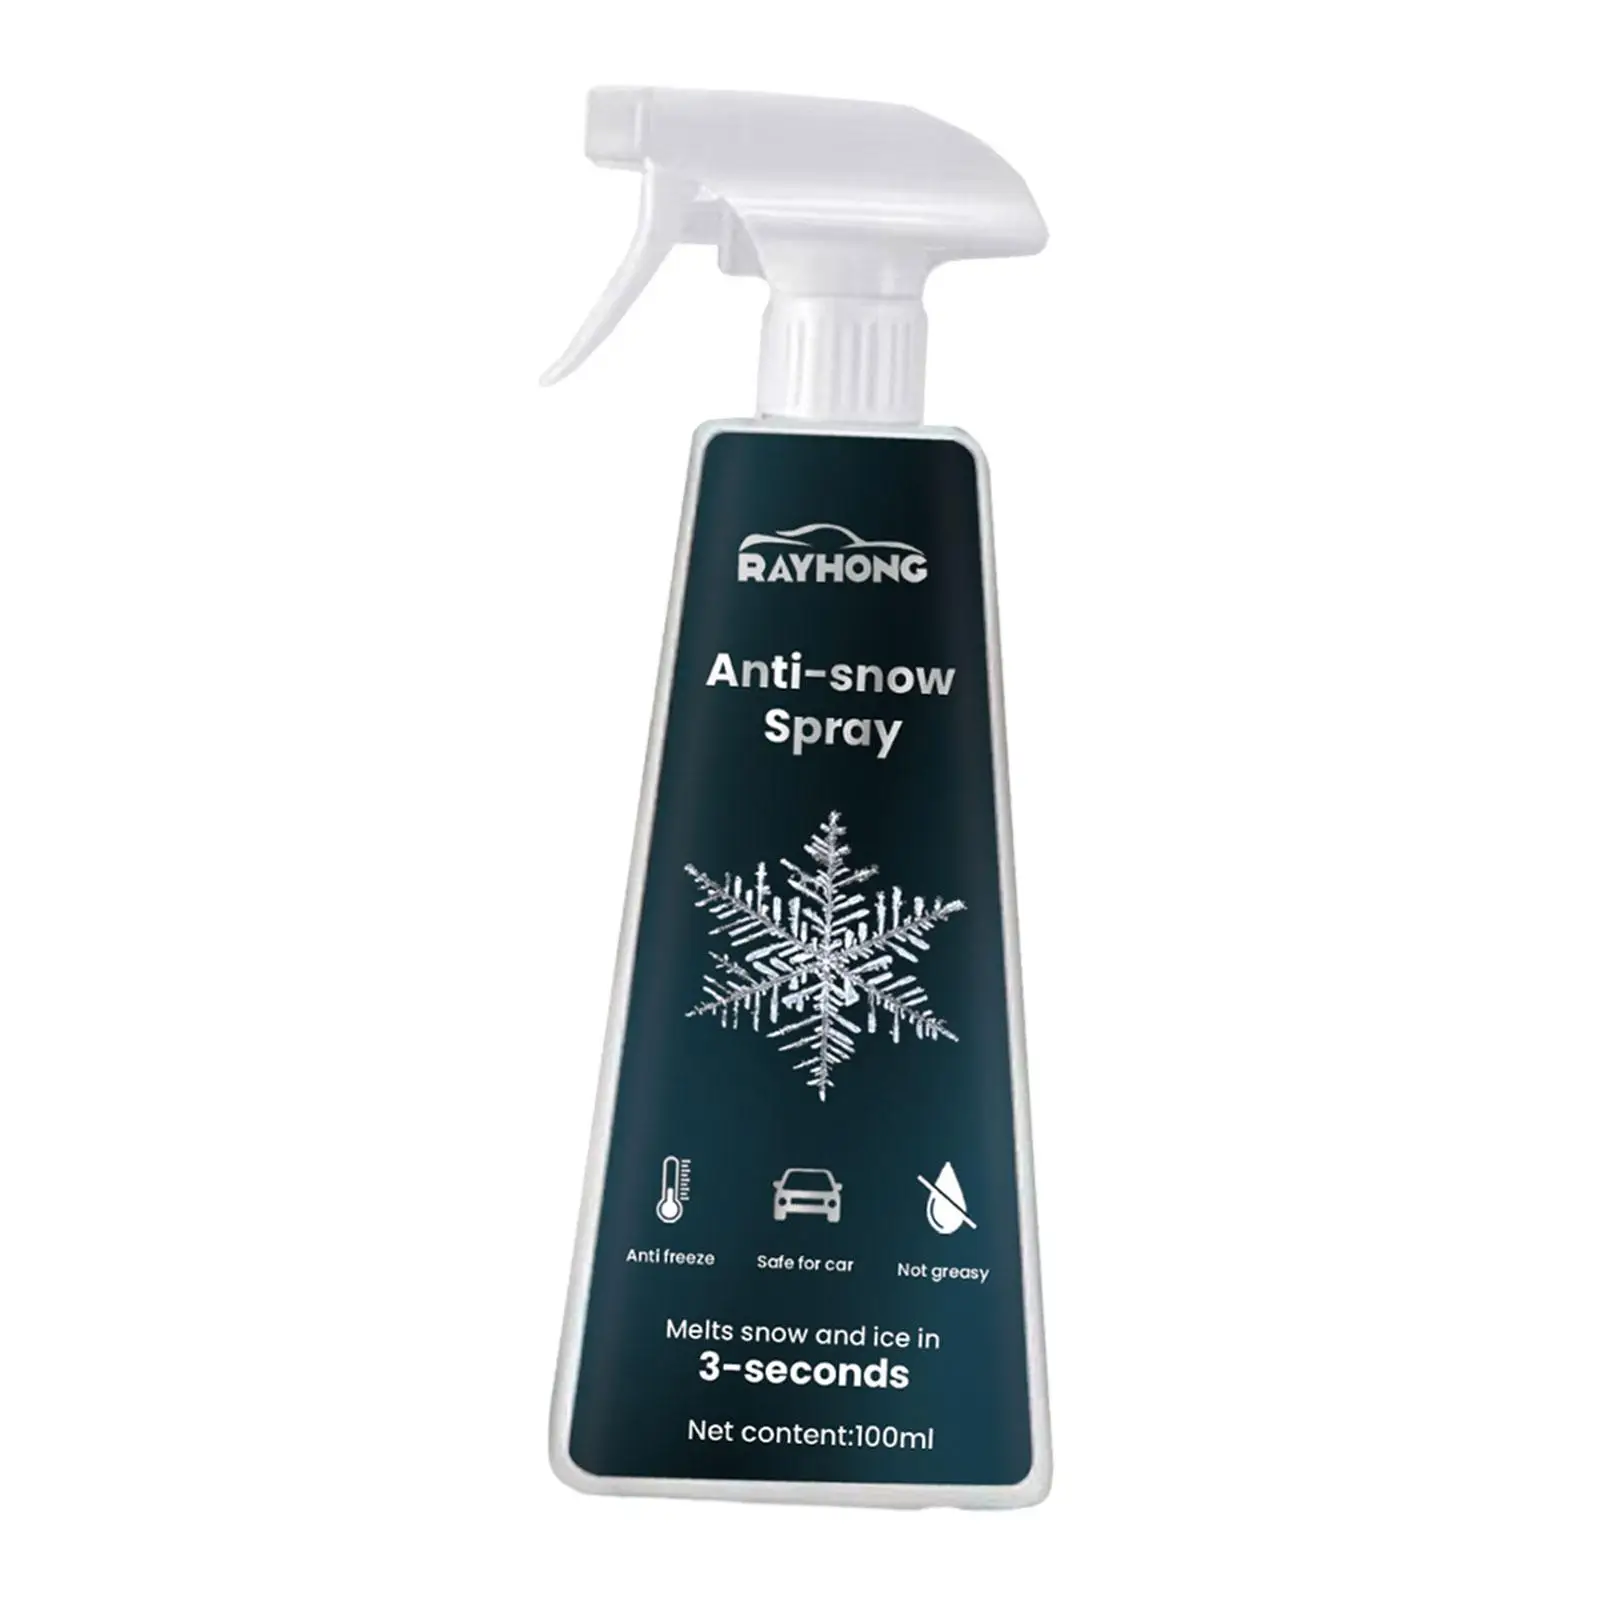 Windshield Spray Agent Windshield Spray Deicer 100ml Defrosting Tool Car Ice Remover Spray Defrosting Liquid for Mirrors